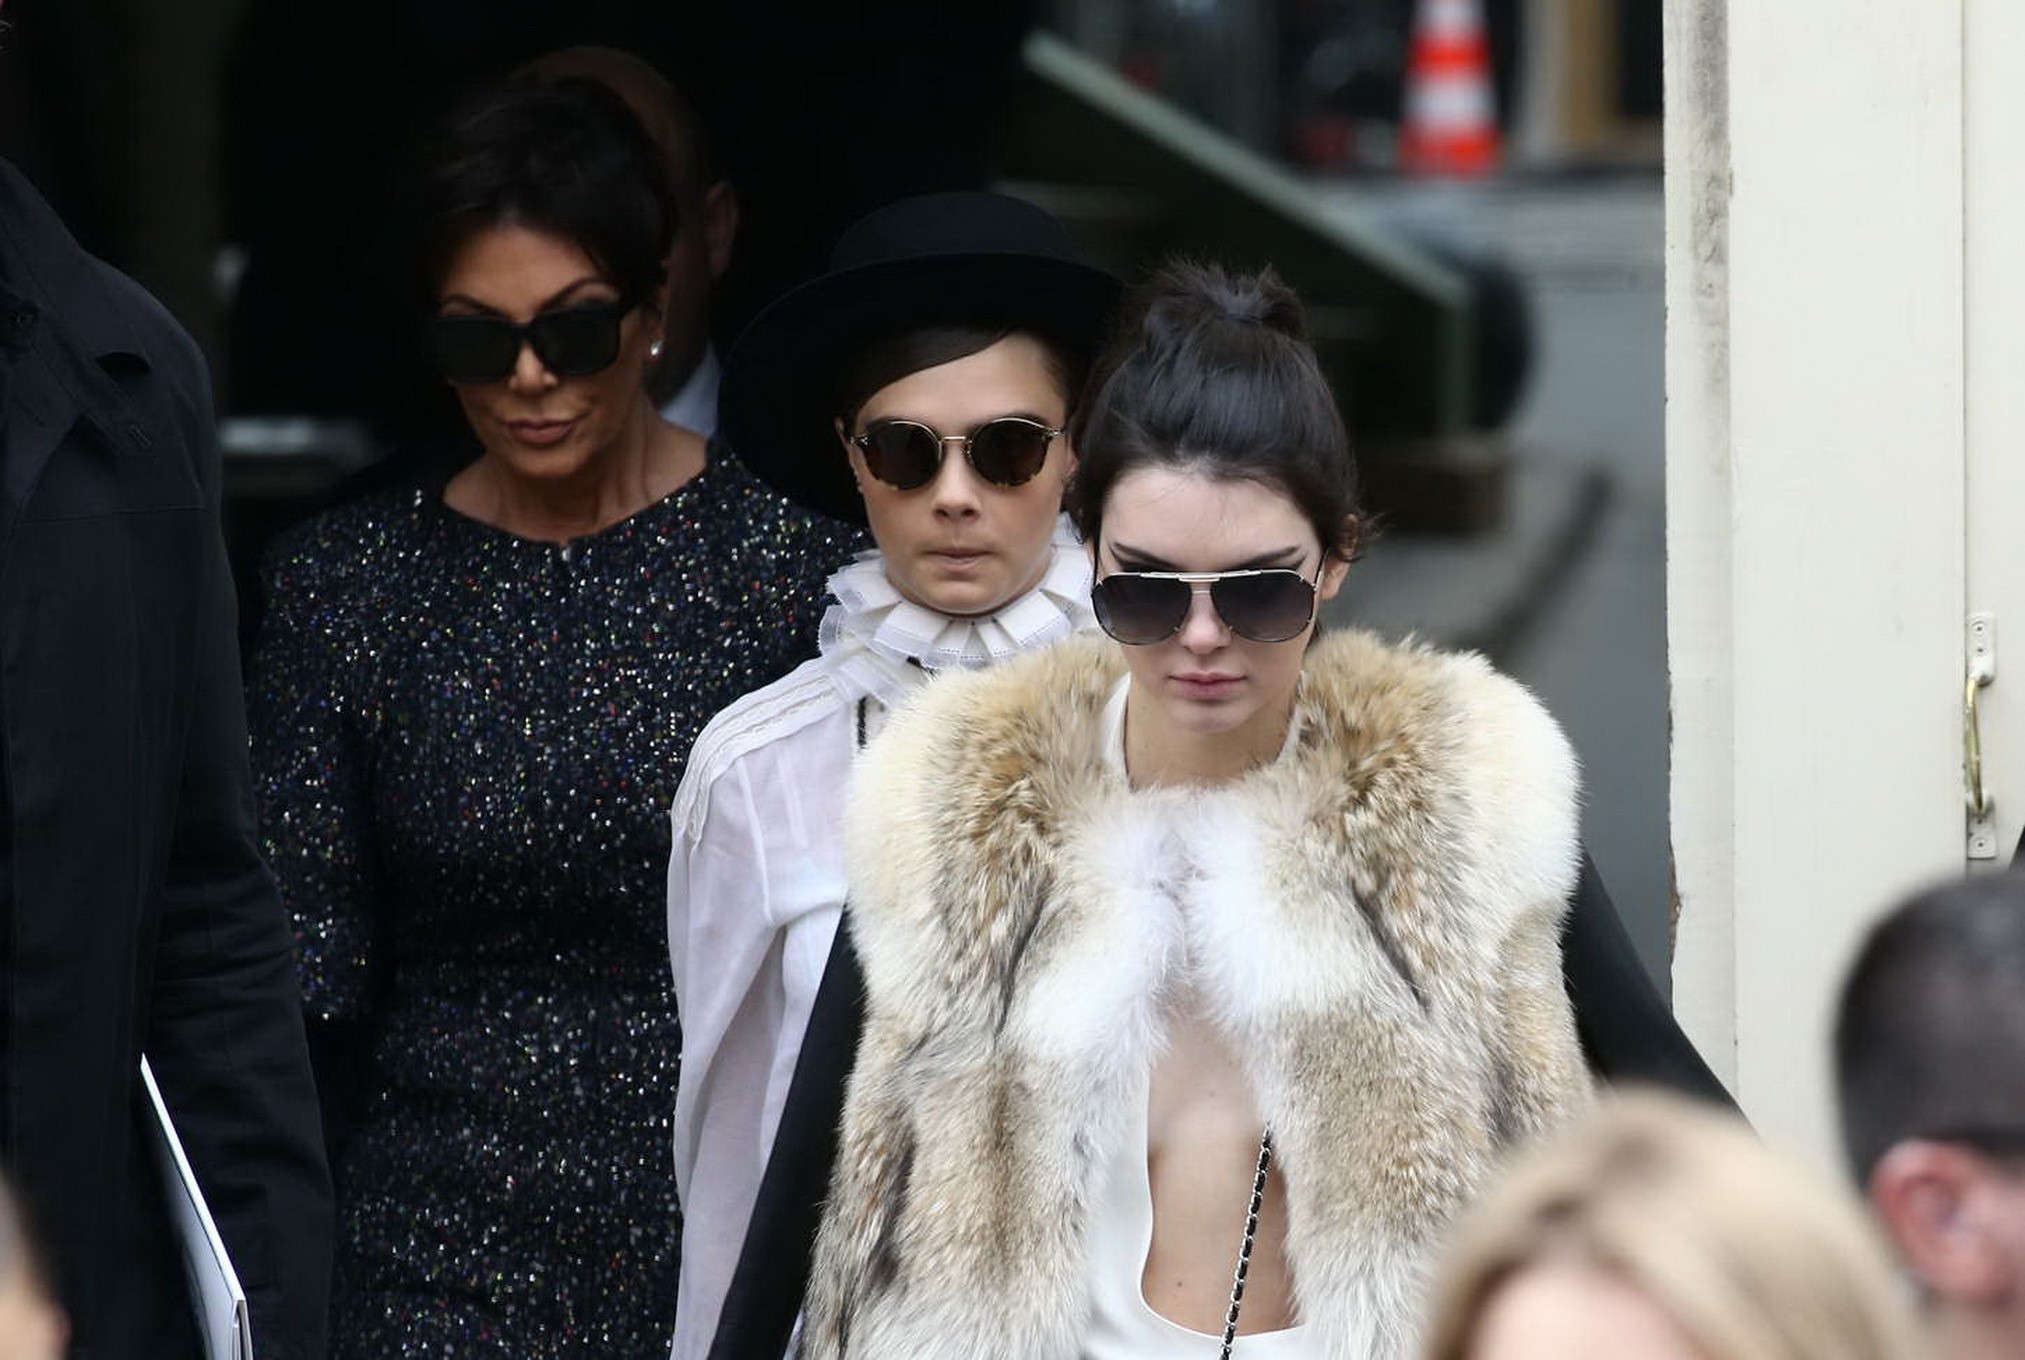 Kendall Jenner braless shows huge cleavage while leaving the Chanel Fashion Show #75170285